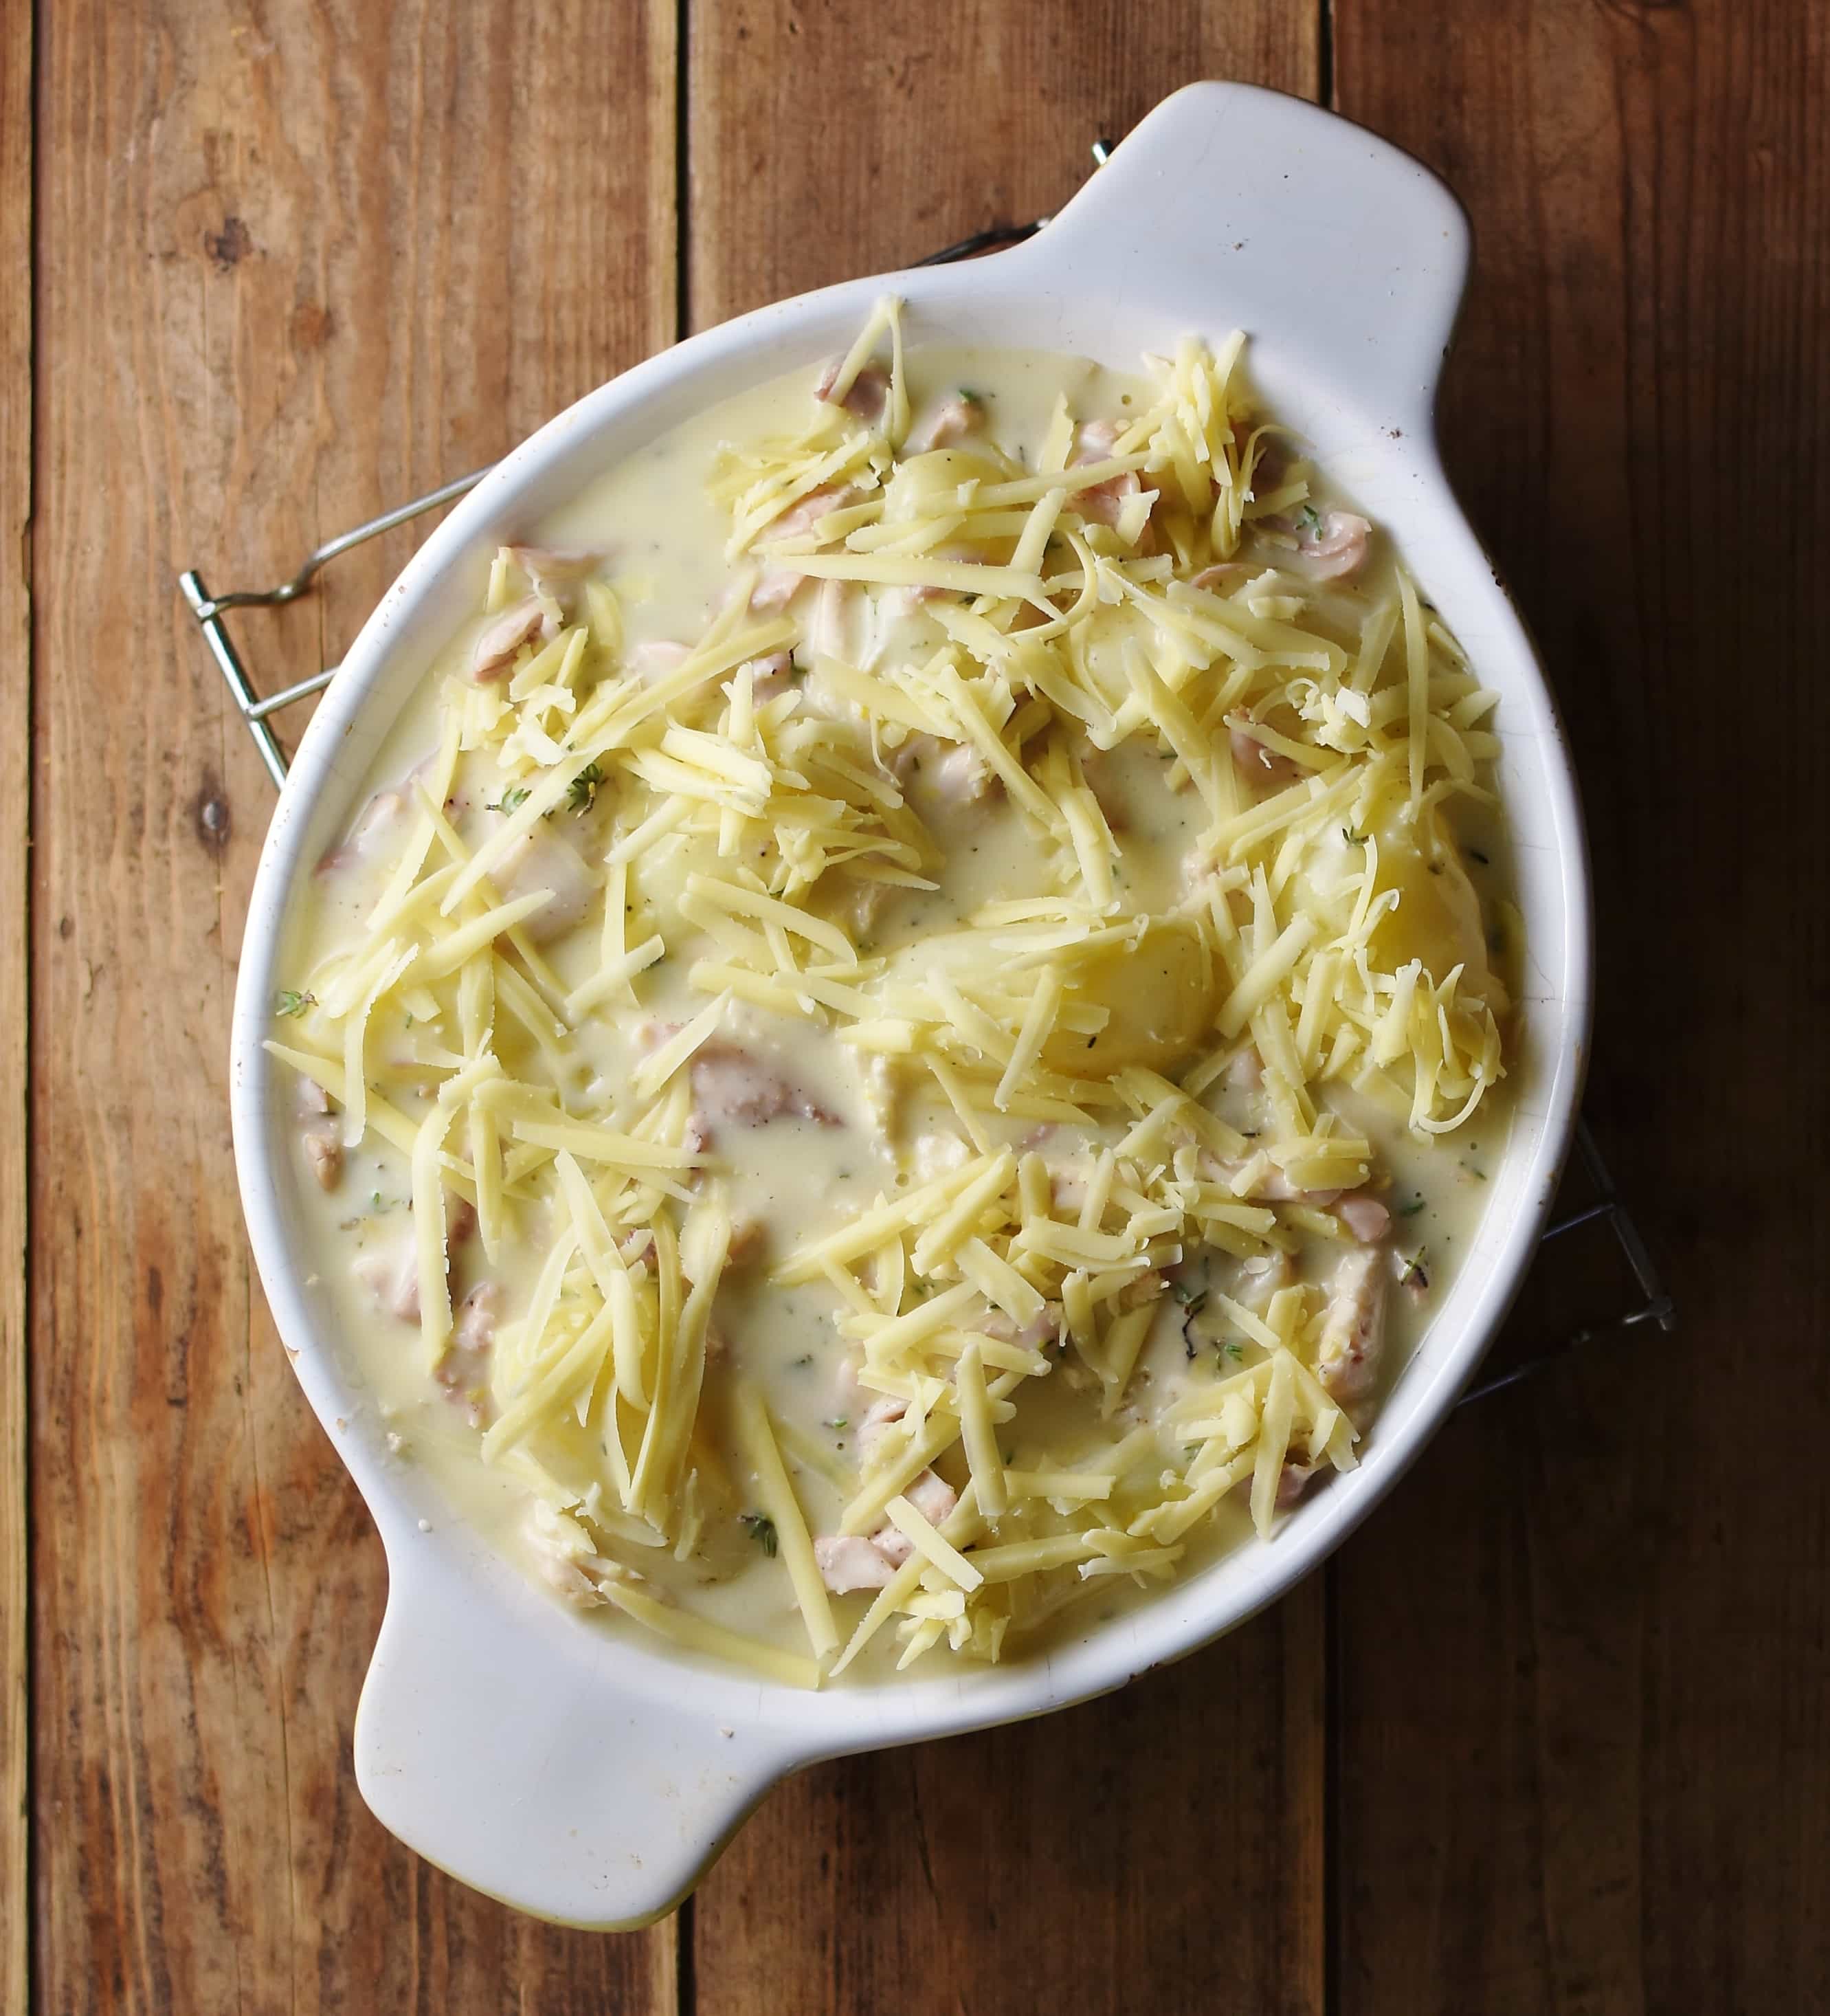 Potatoes and chicken pieces in creamy sauce with grated cheese on top in white oval dish.